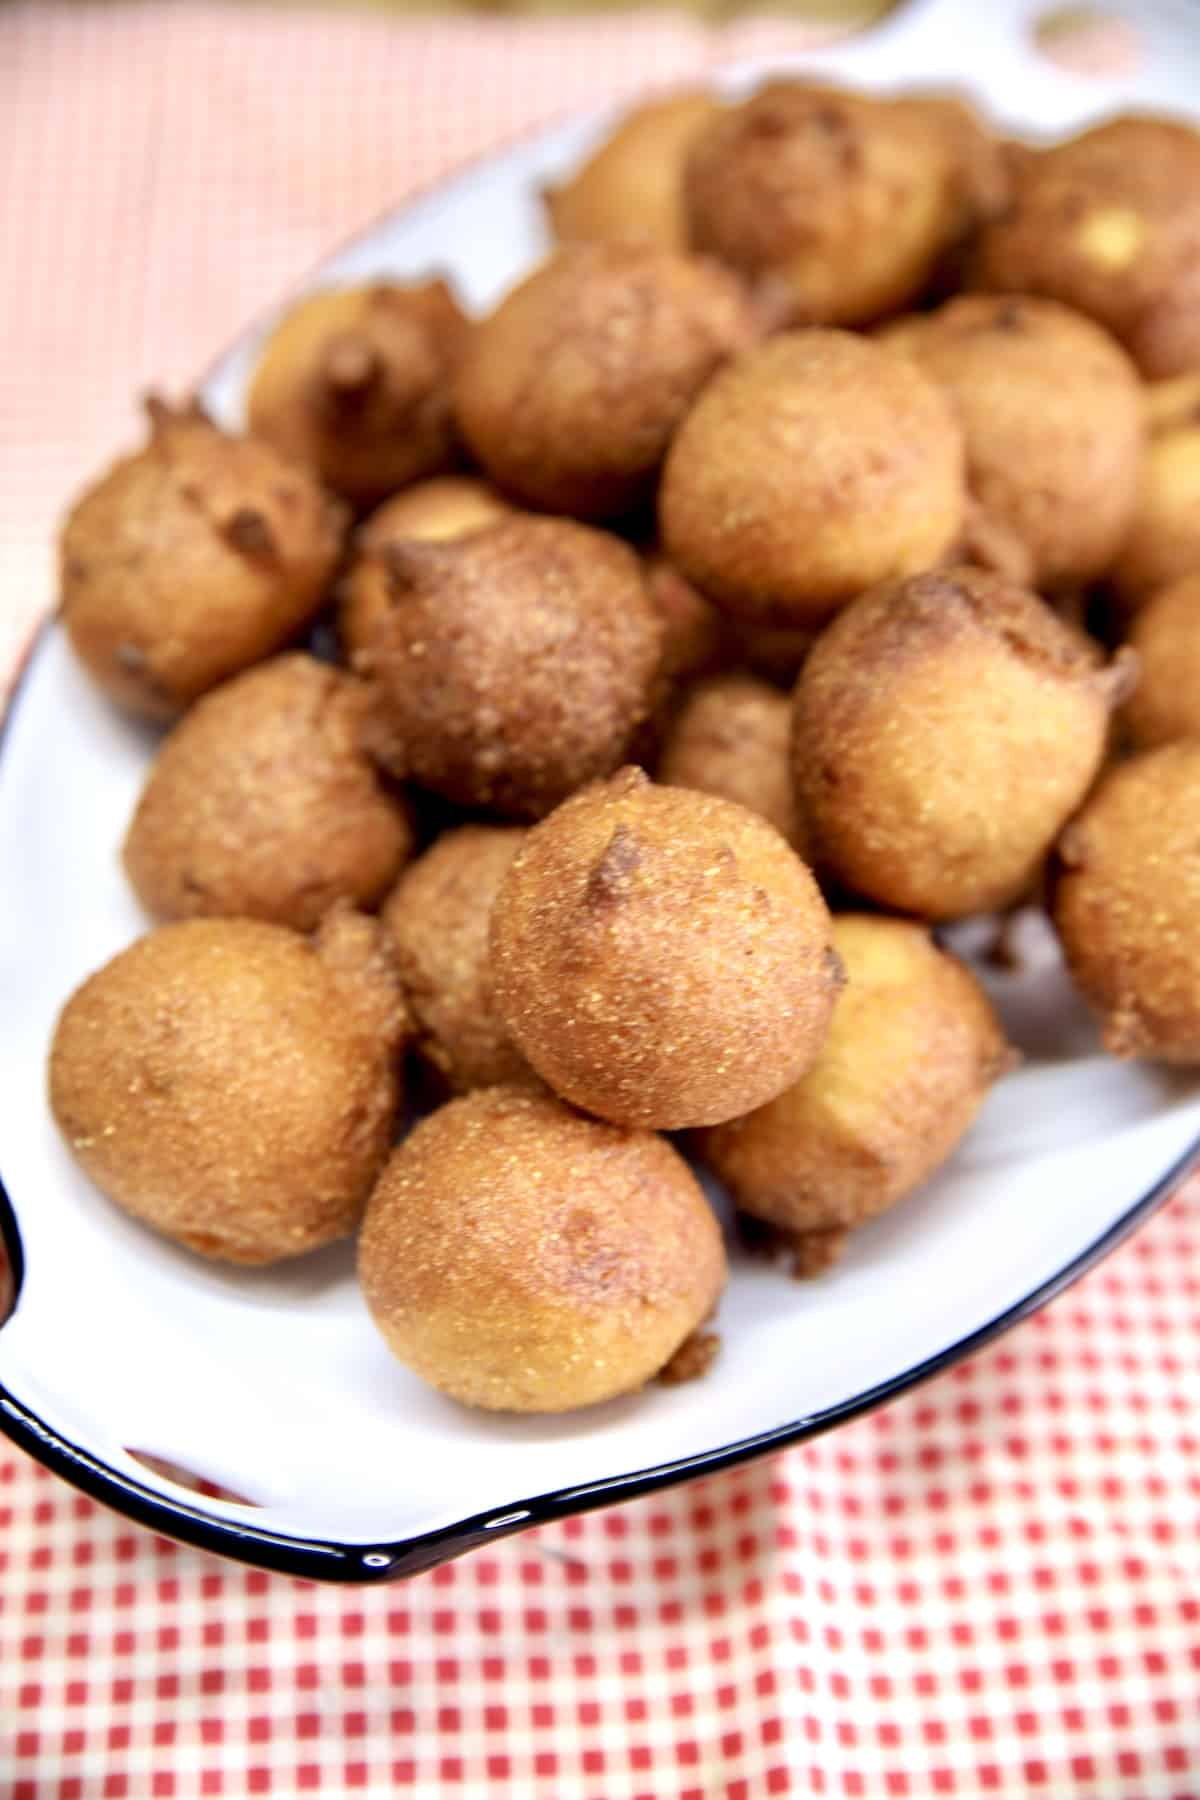 Platter of hush puppies on a red check cloth.